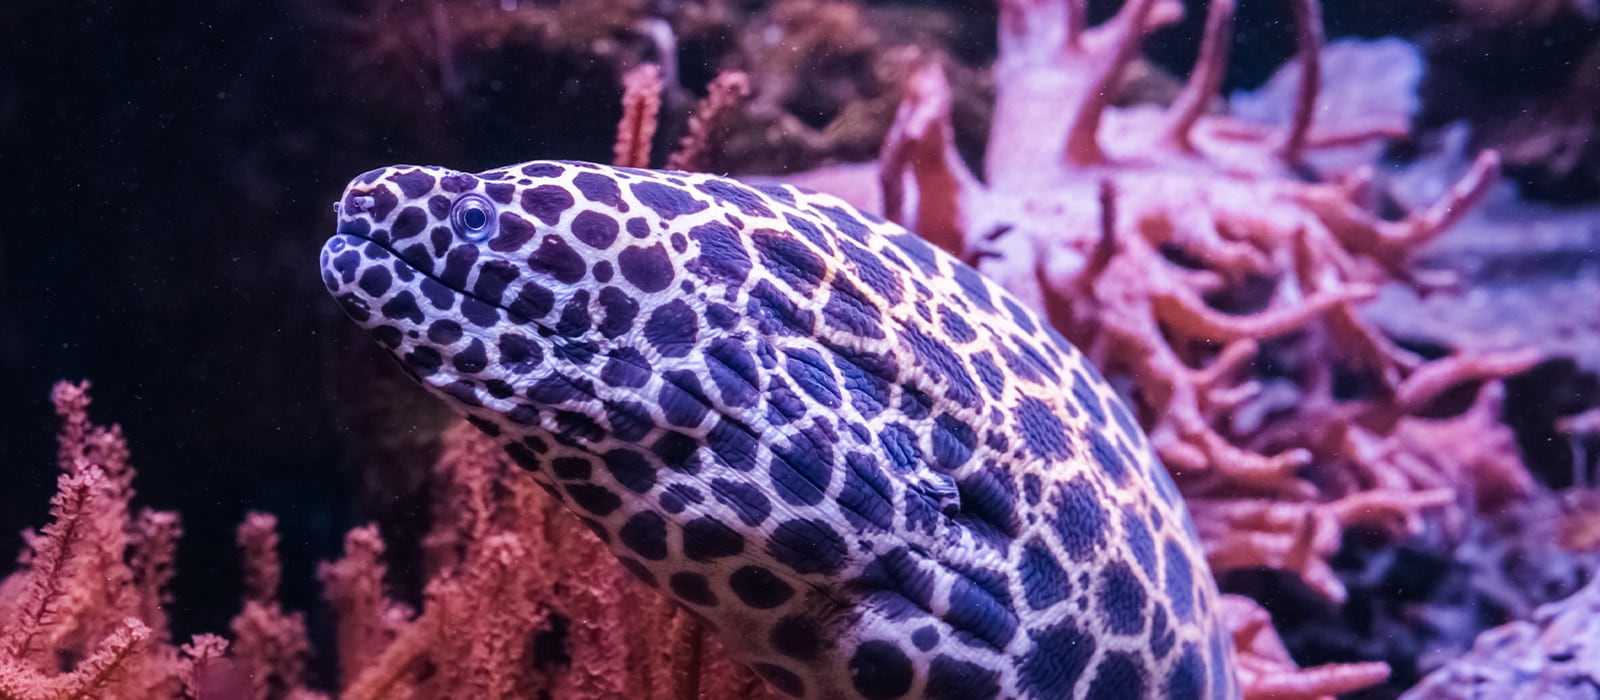 A spotted honeycomb moray eel swimming in front of pink coral.